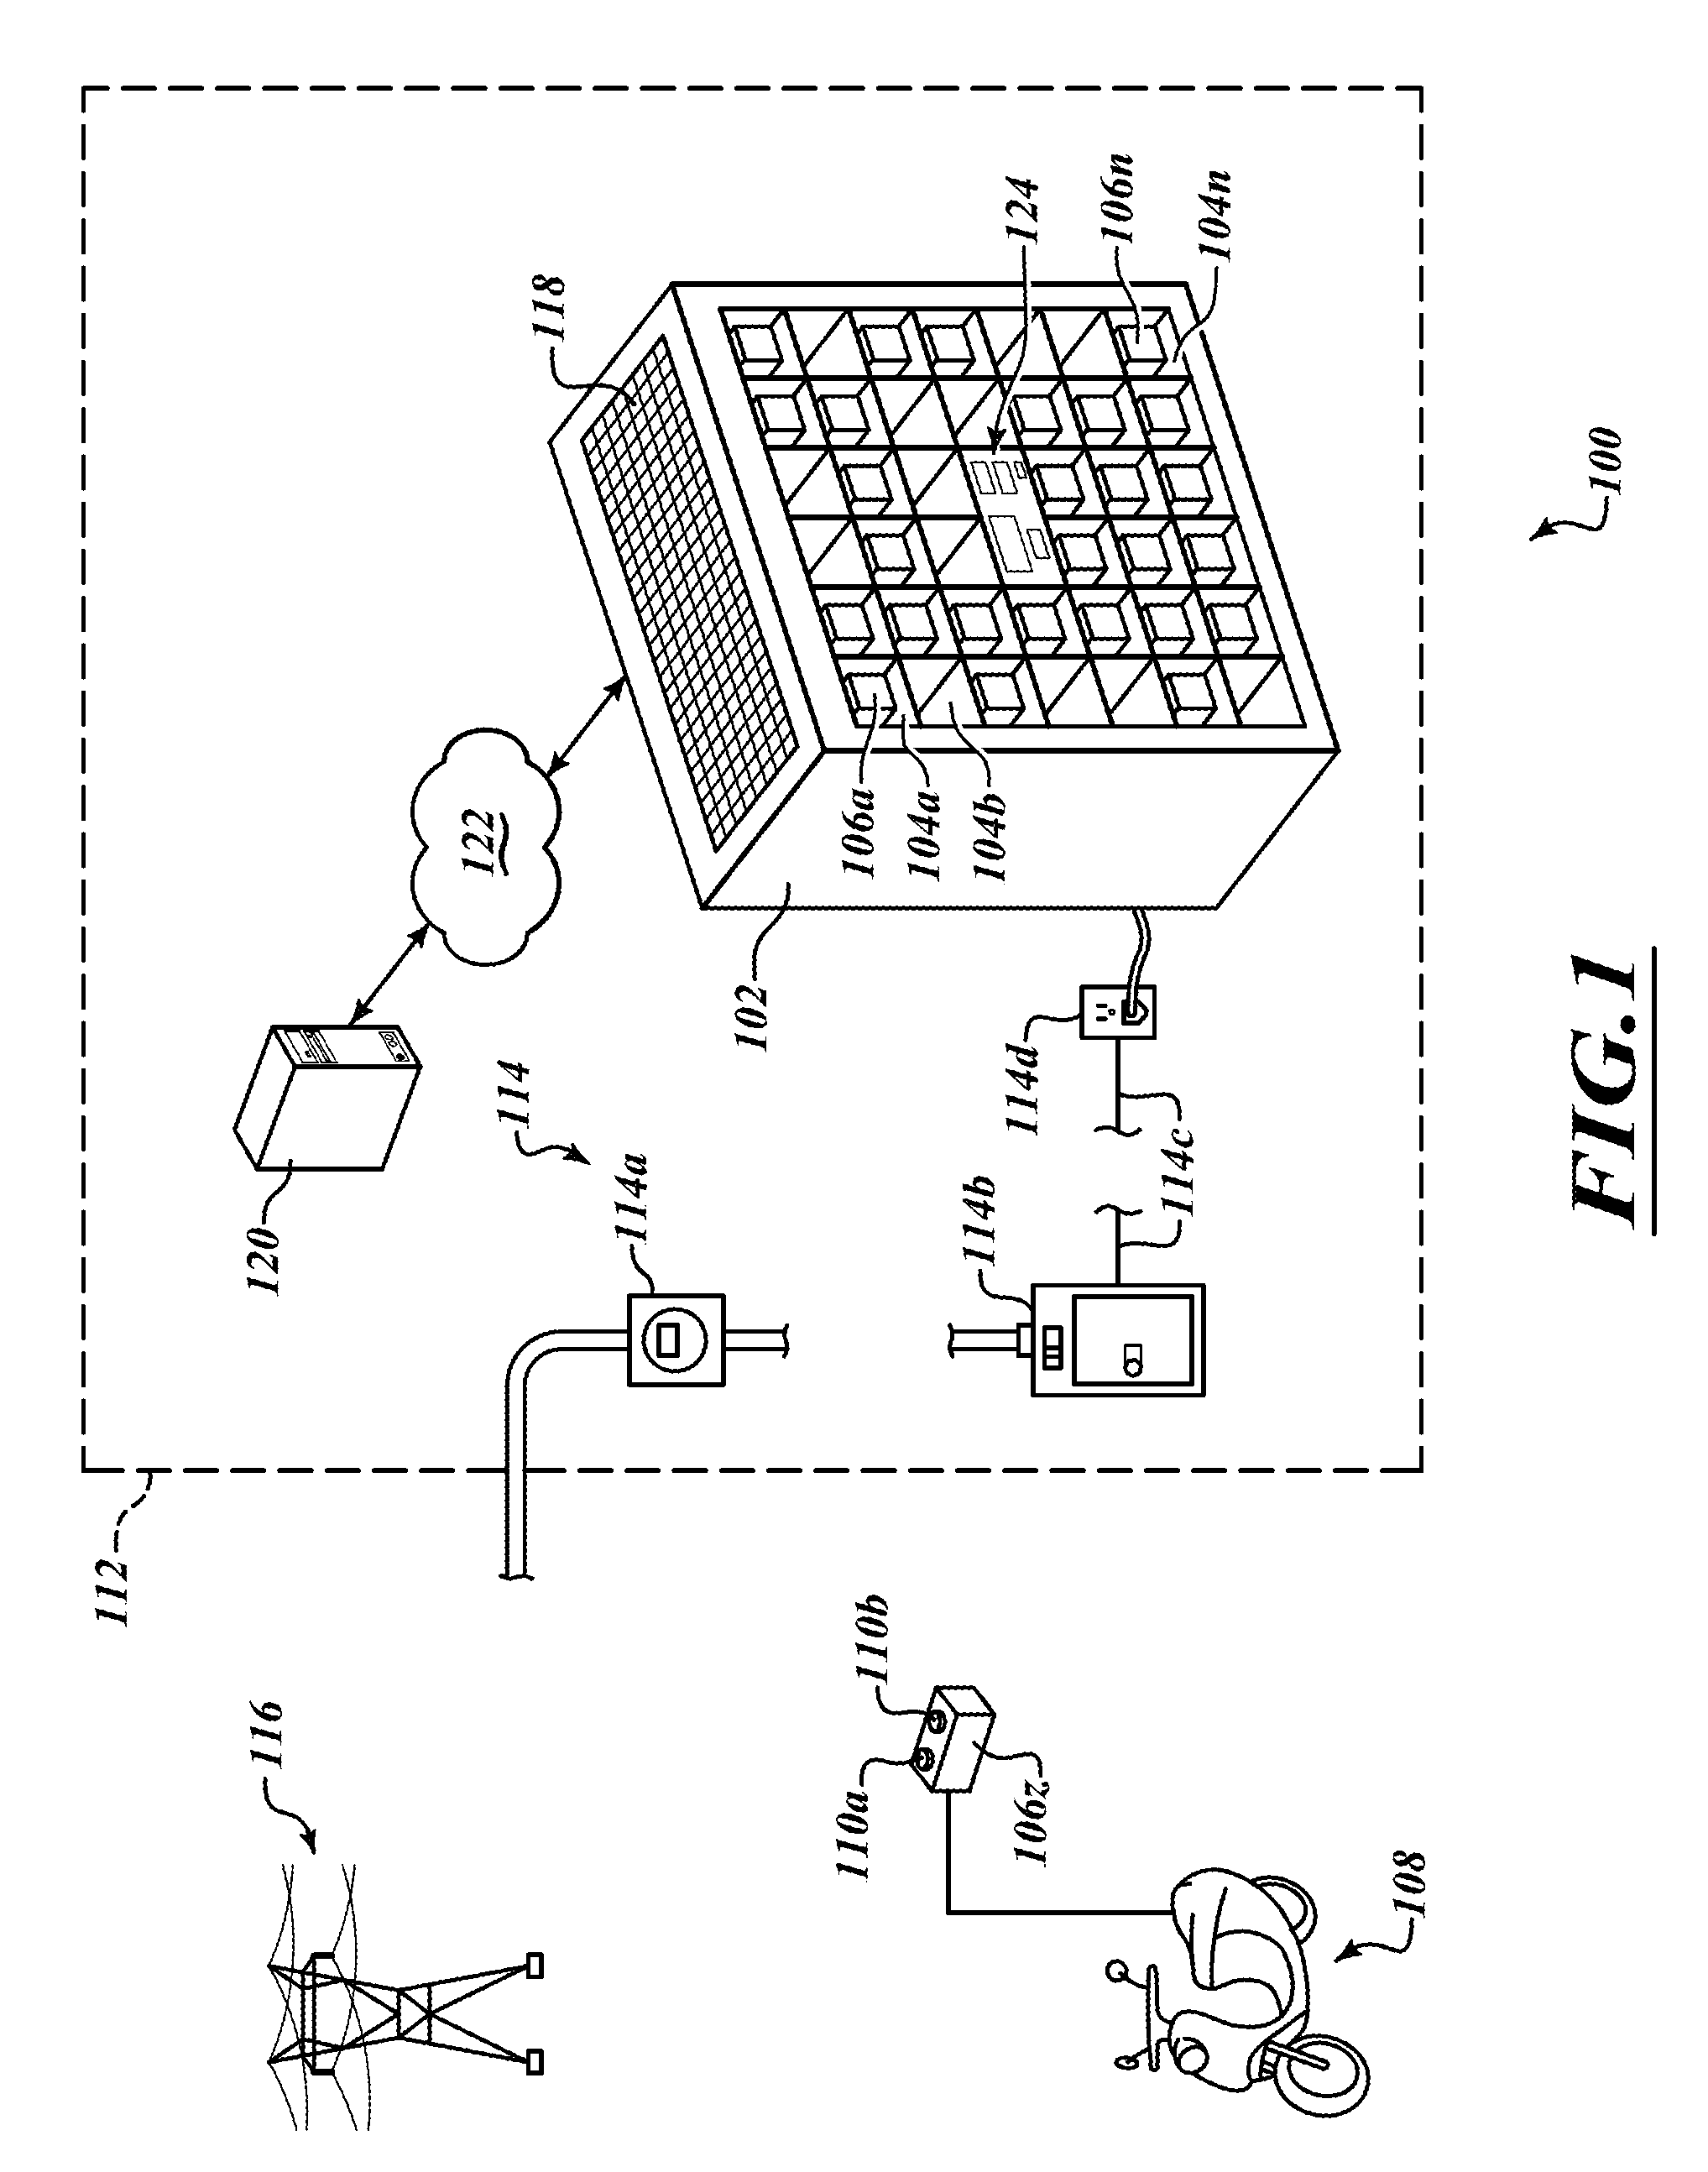 Apparatus, method and article for redistributing power storage devices, such as batteries, between collection, charging and distribution machines